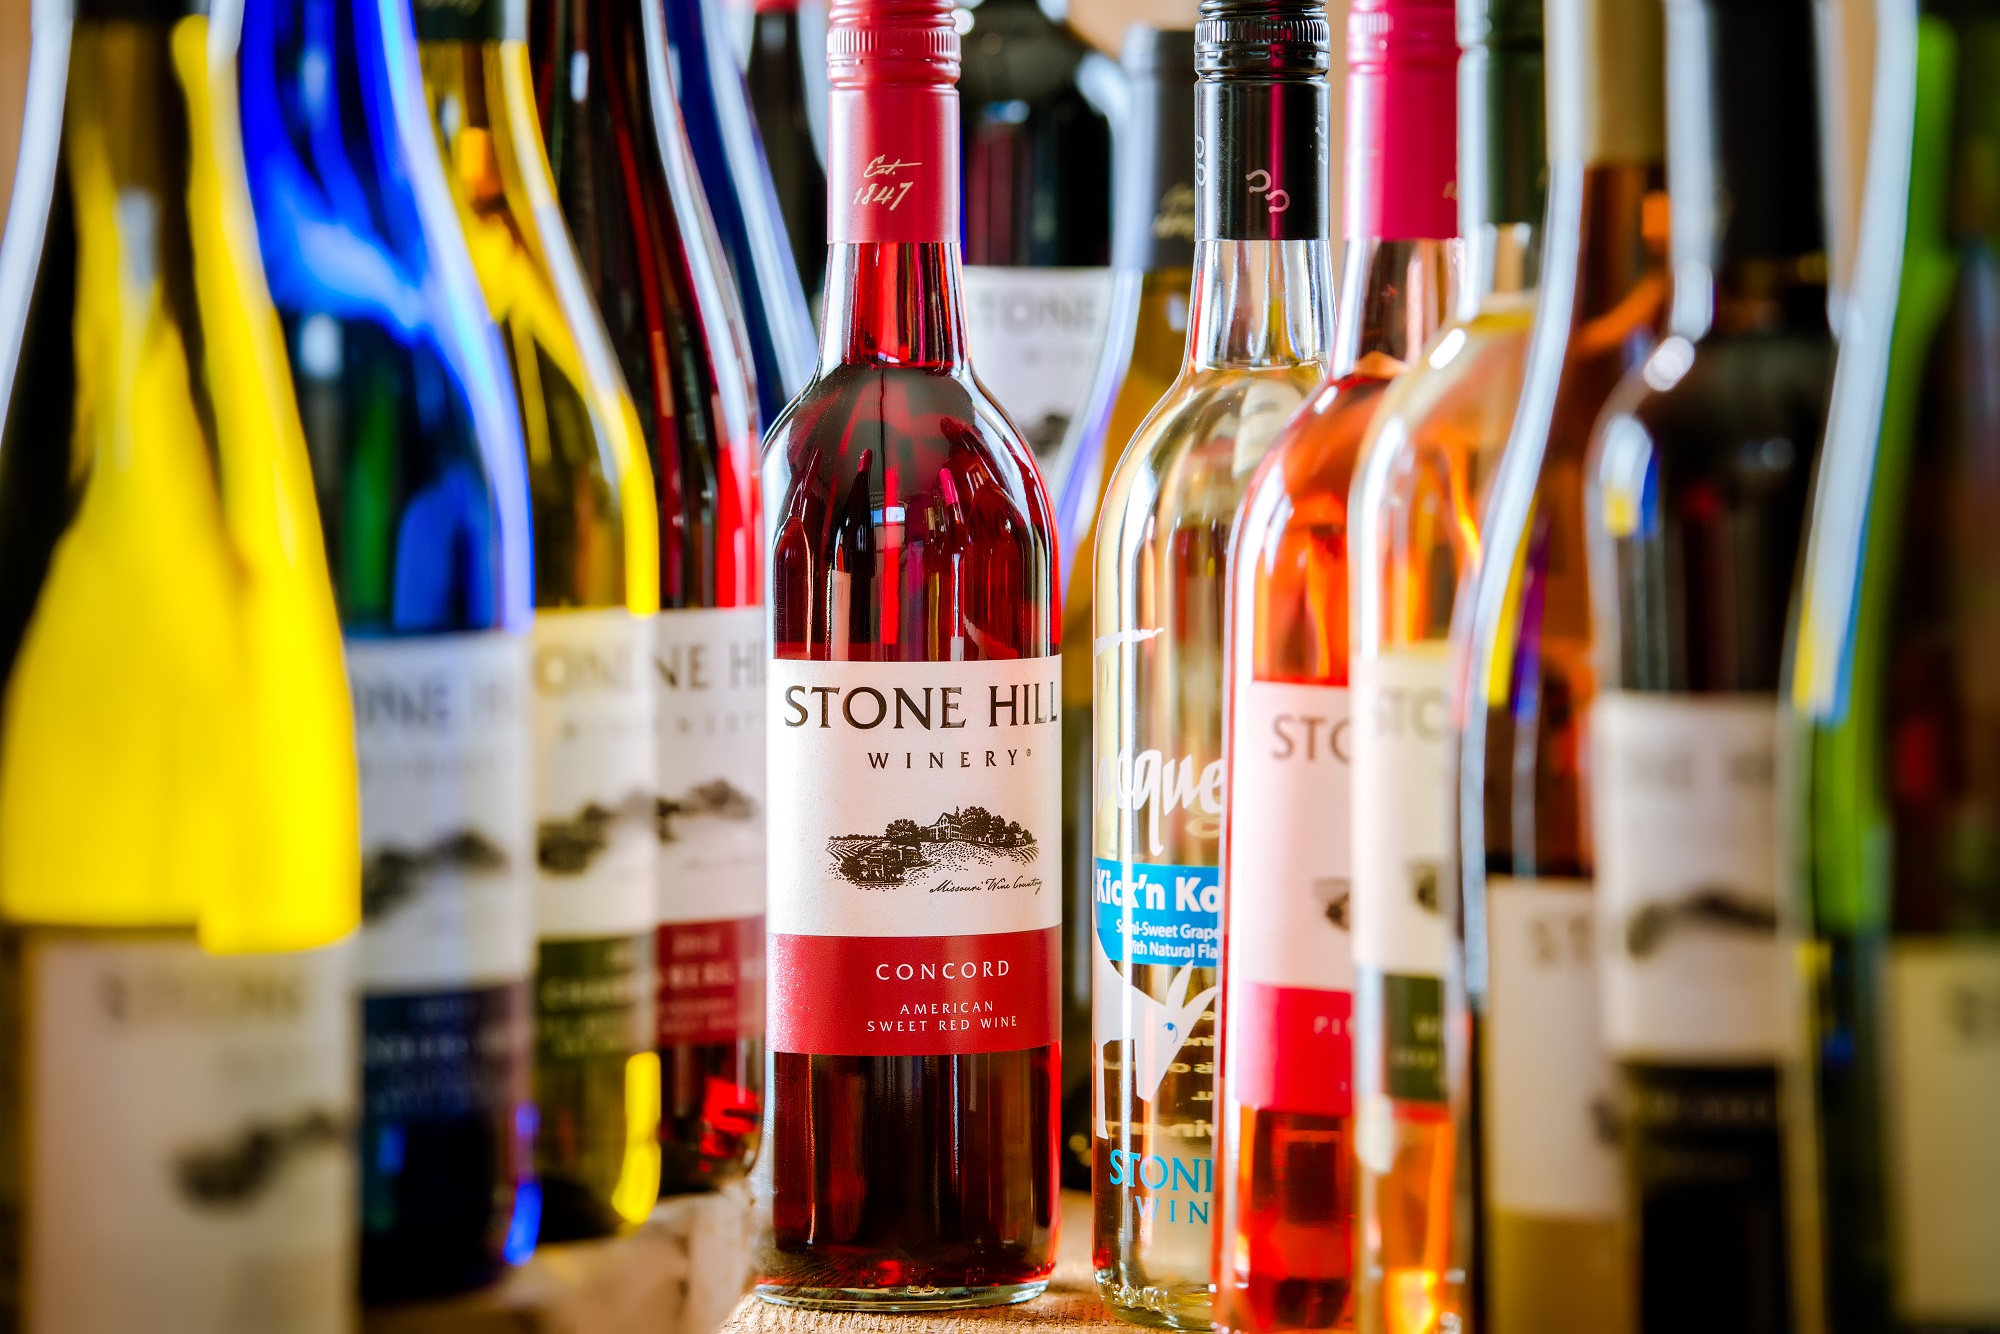 stone hill winery wine bottle line up concord